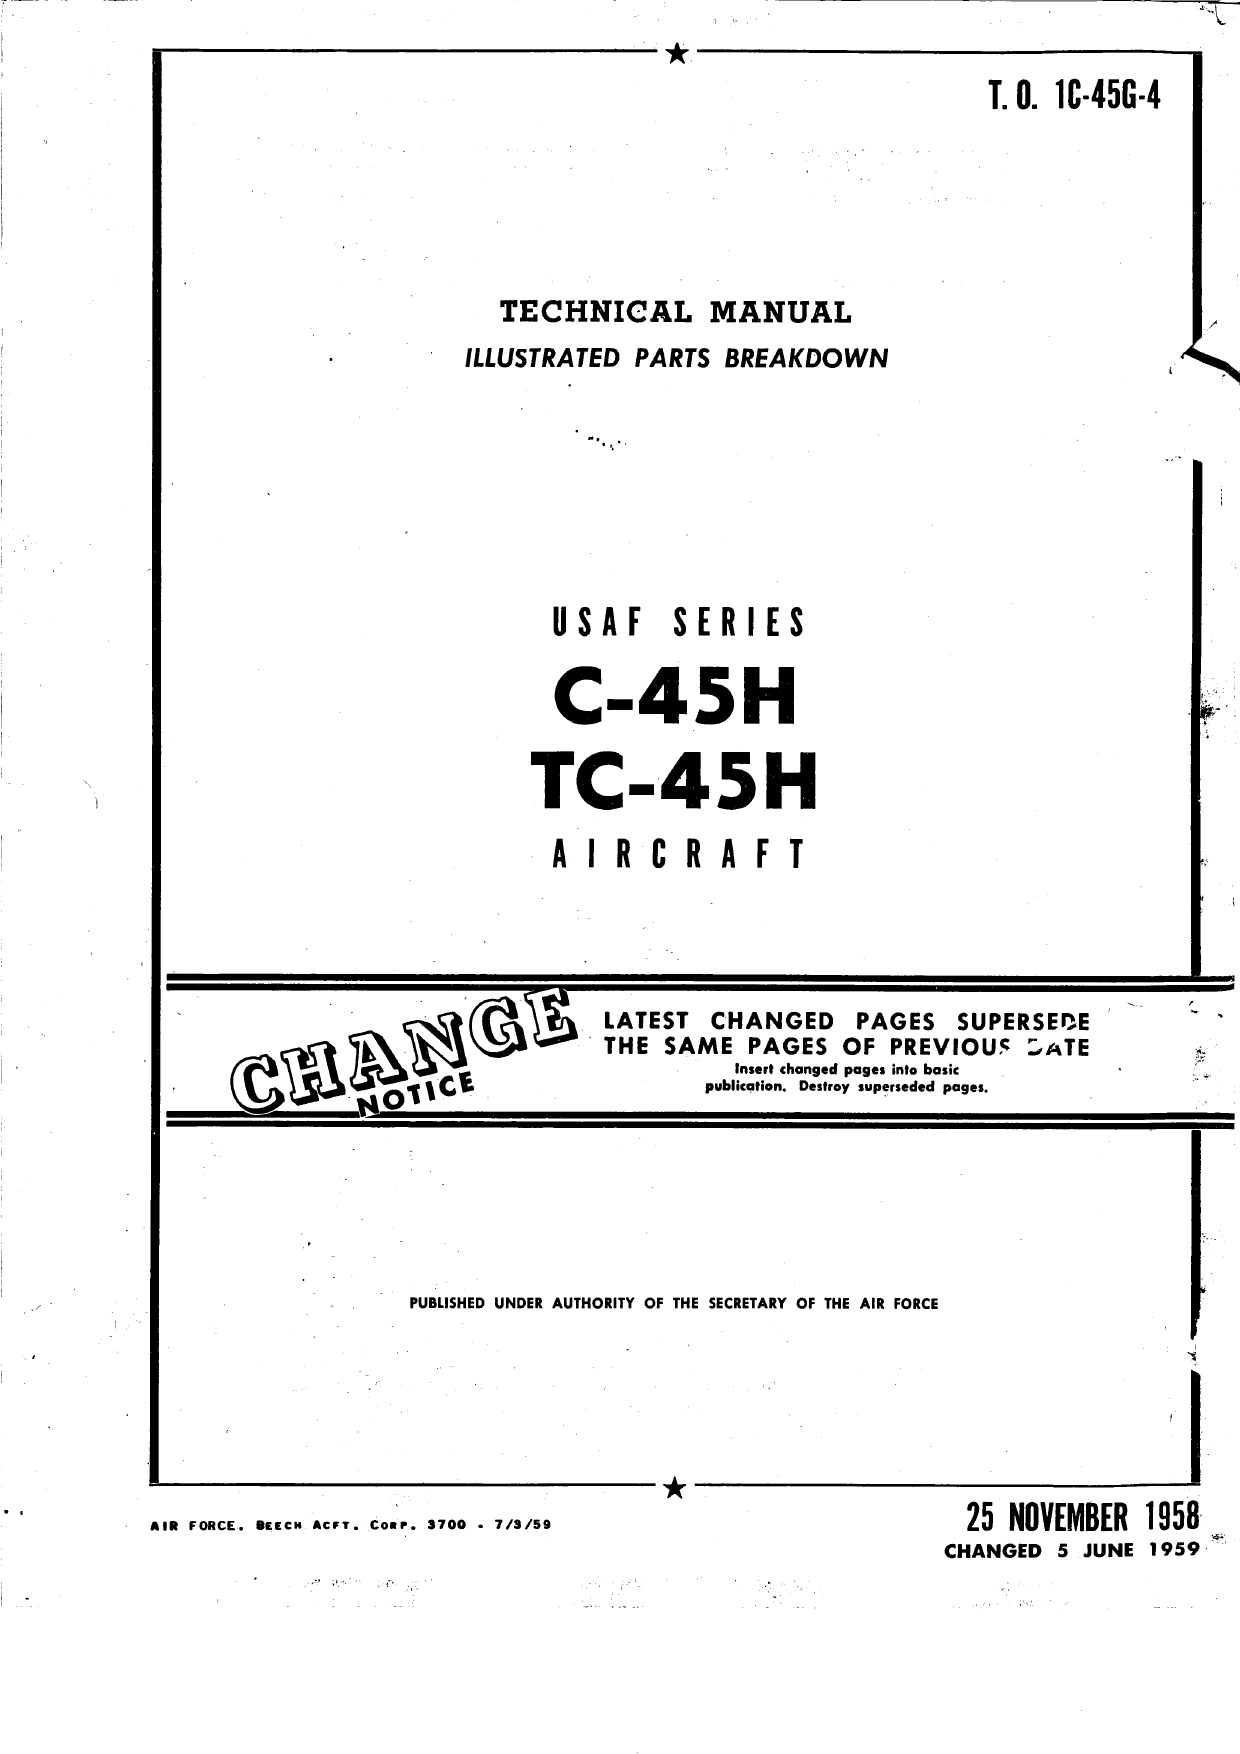 Sample page 1 from AirCorps Library document: Illustrated Parts Breakdown for C-45H and TC-45H Aircraft